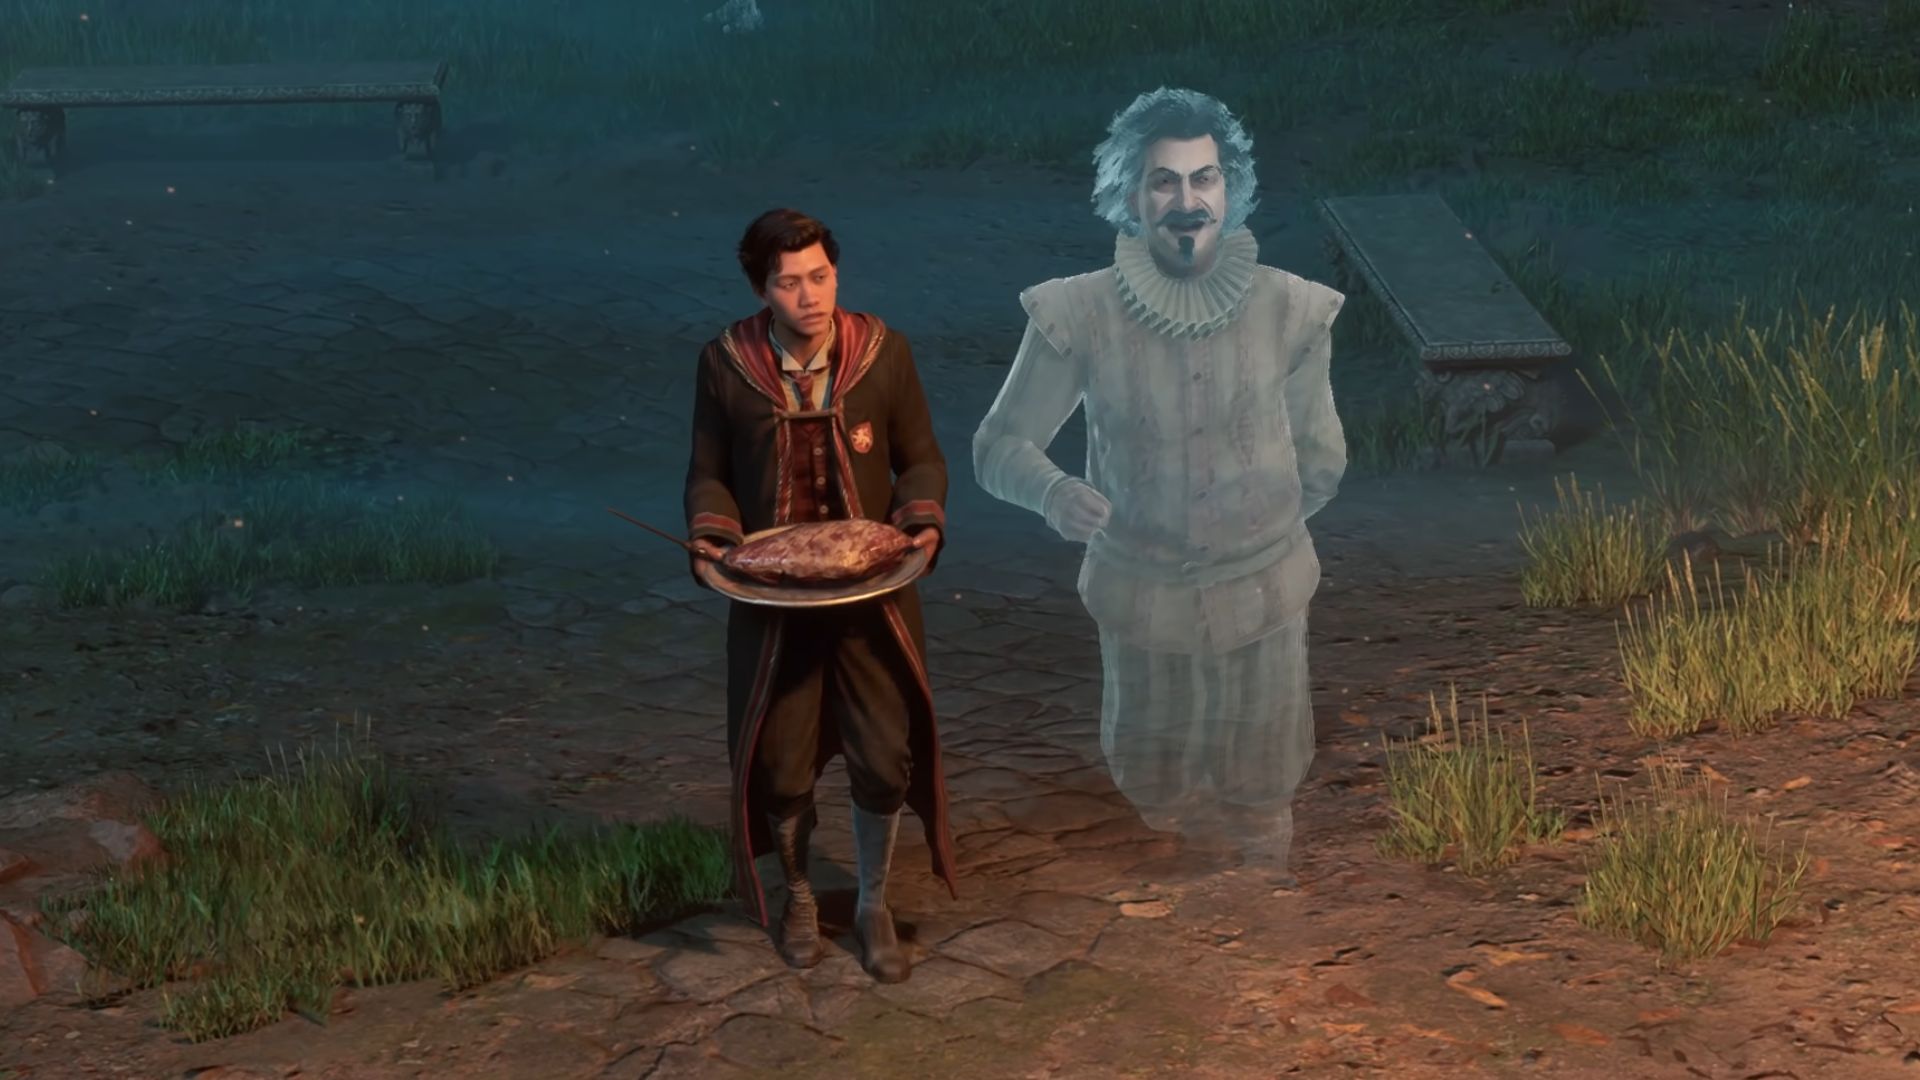 Hogwarts Legacy Characters: Nearly Headless Nick is shown with the player